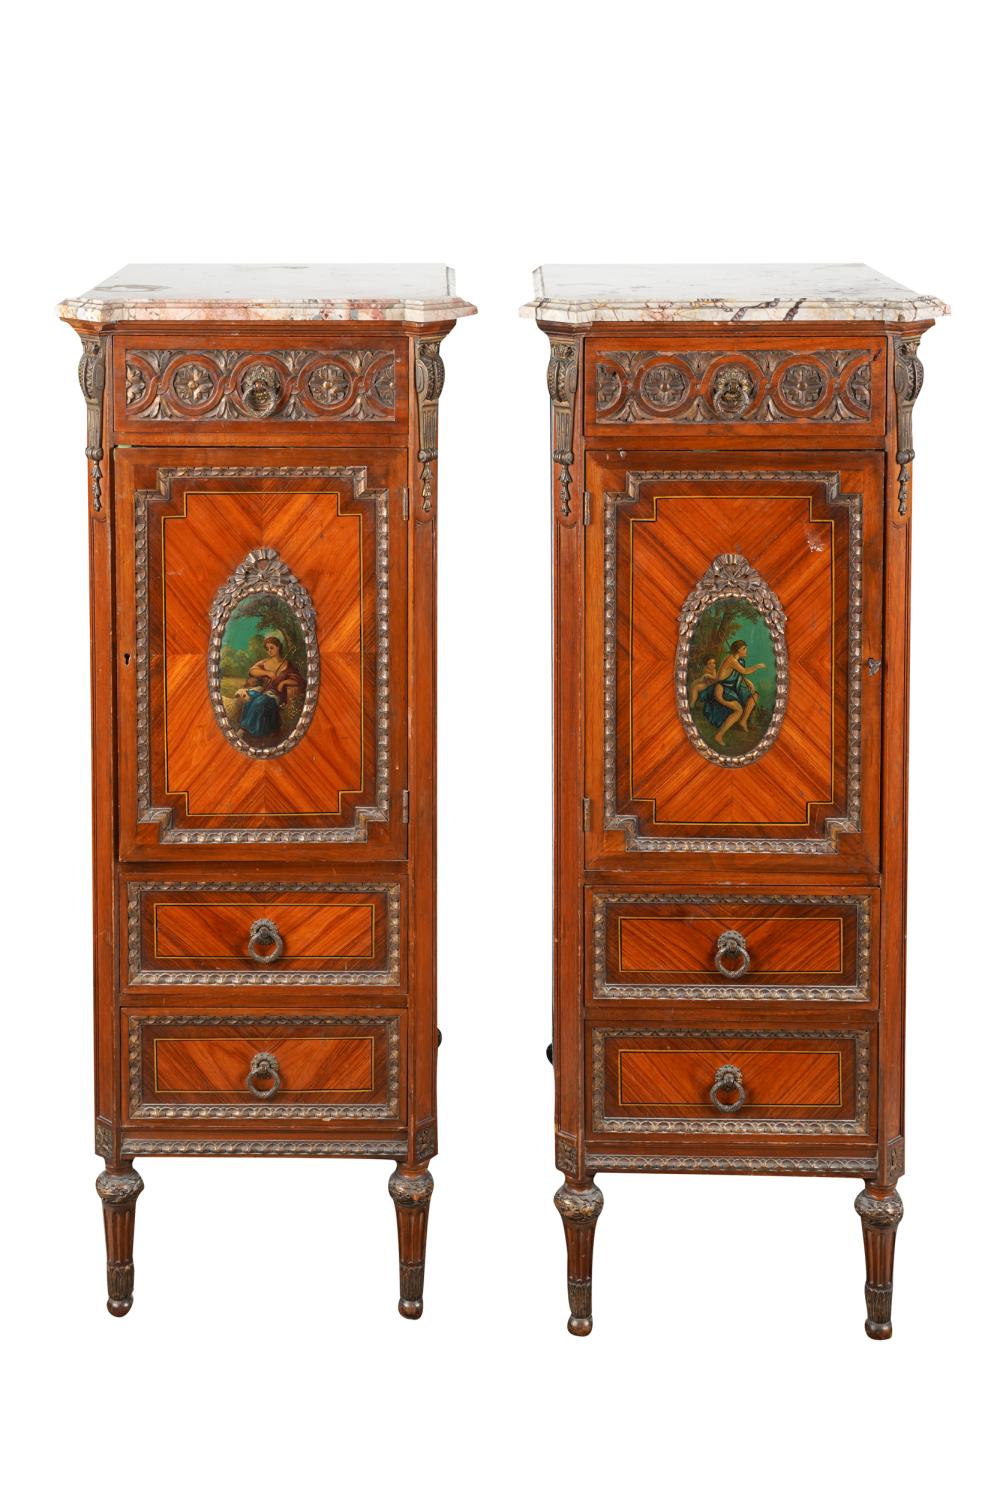 PAIR OF NARROW FRENCH MARBLE TOP